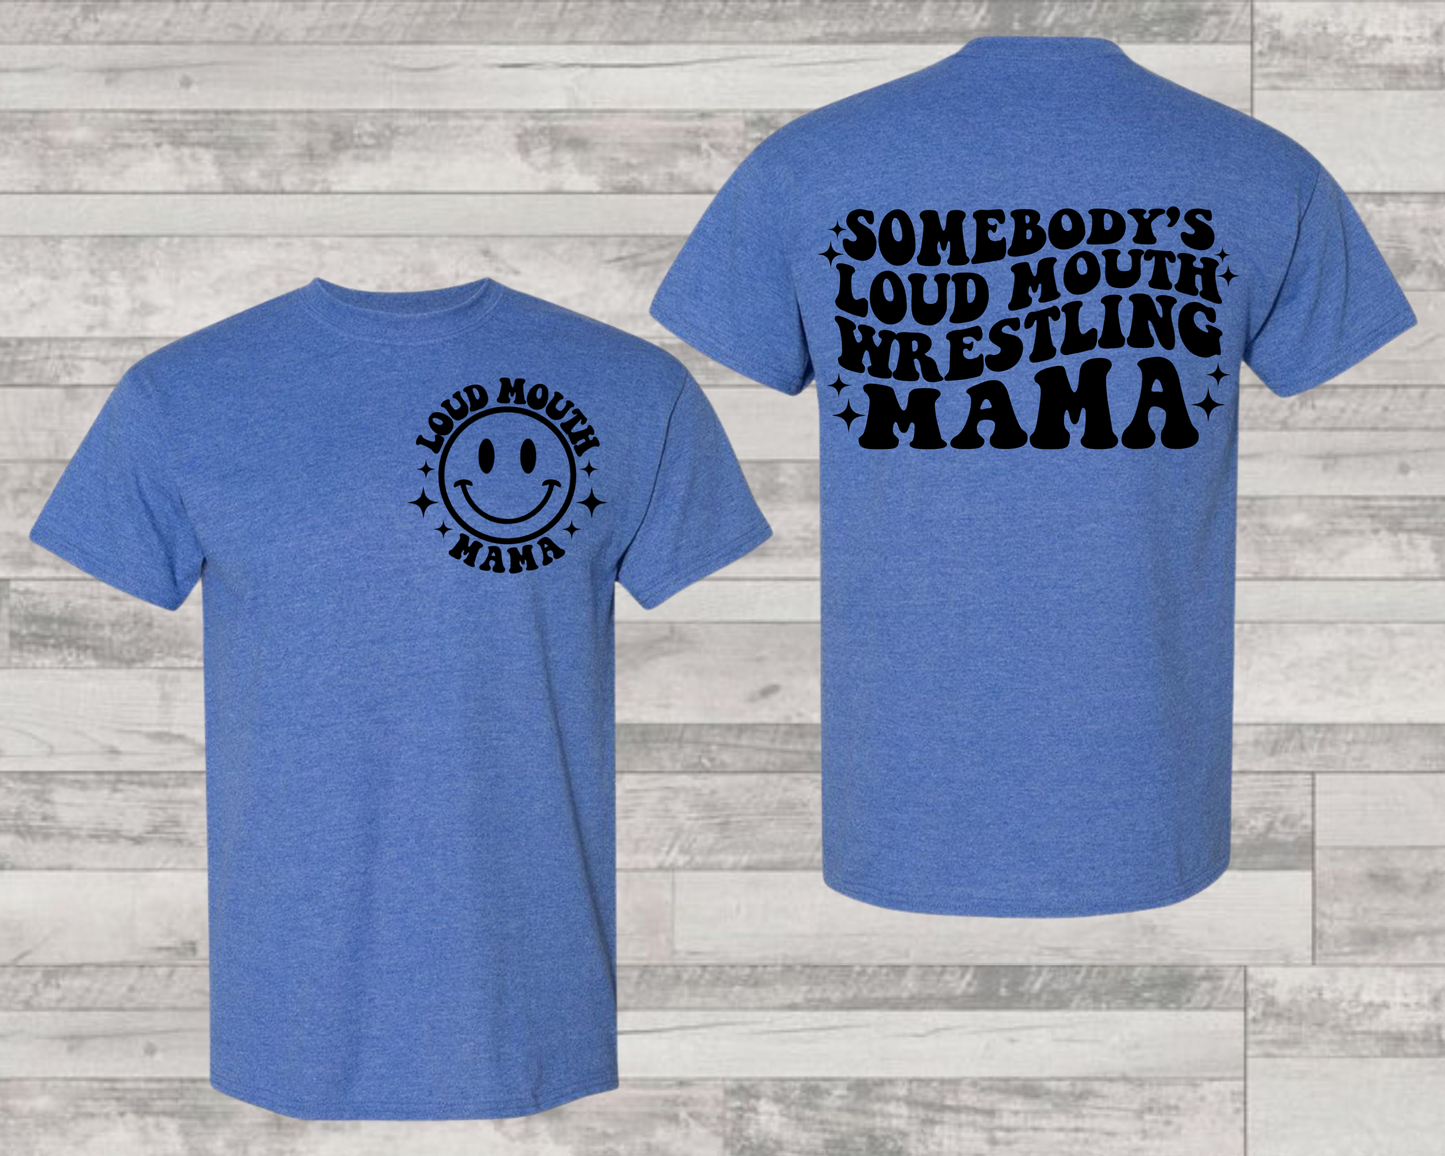 Somebodies loud mouth wrestling mama (BACK)- DTF